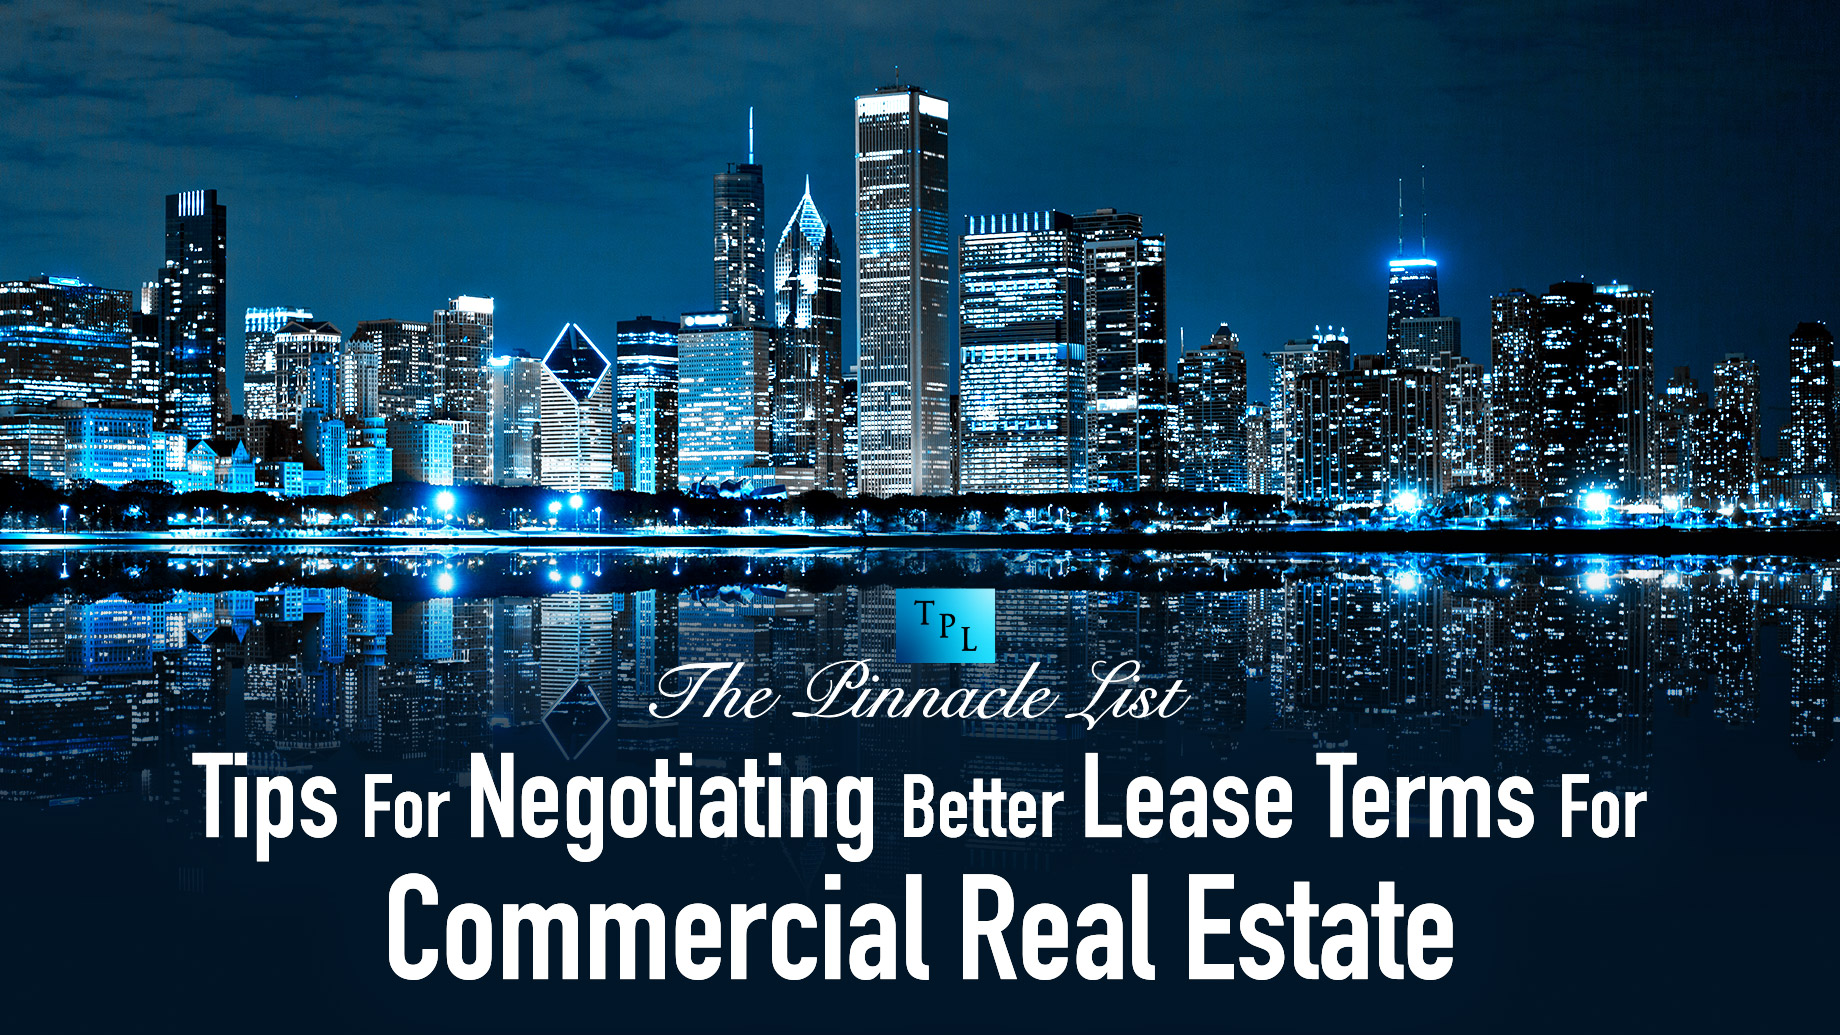 Tips For Negotiating Better Lease Terms For Commercial Real Estate